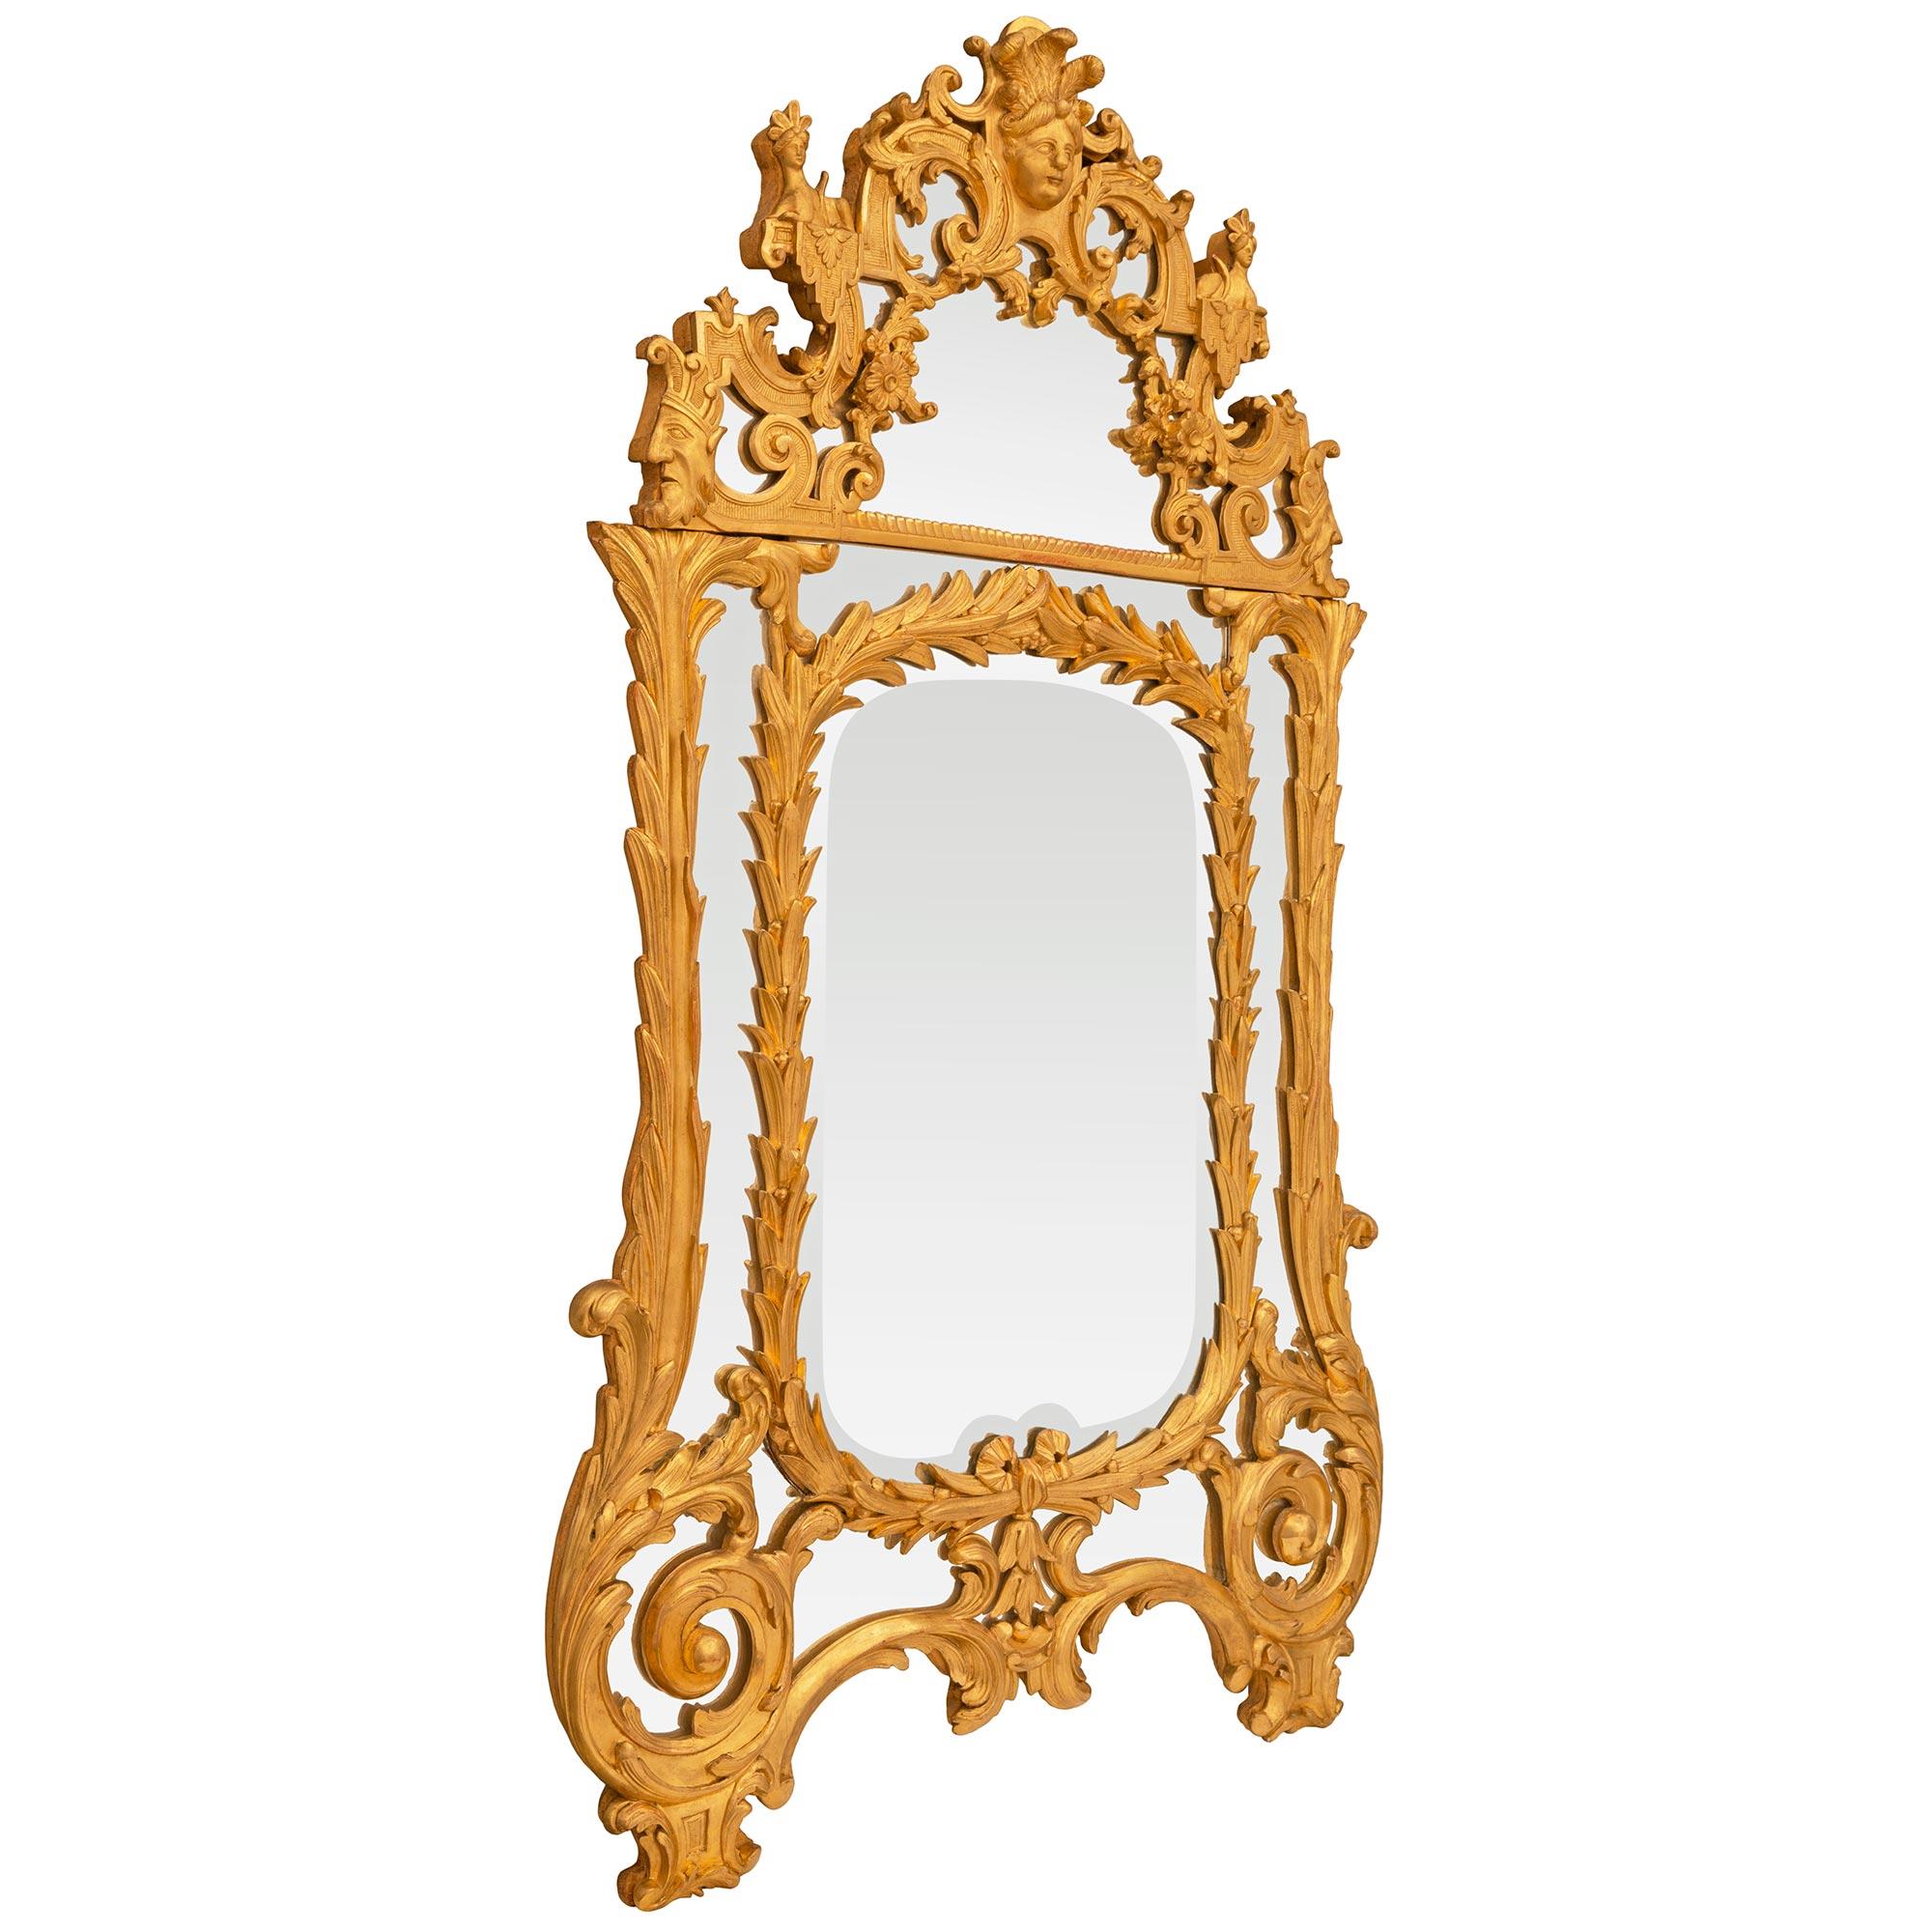 French Early 18th Century Regence Period Giltwood Mirror In Good Condition For Sale In West Palm Beach, FL